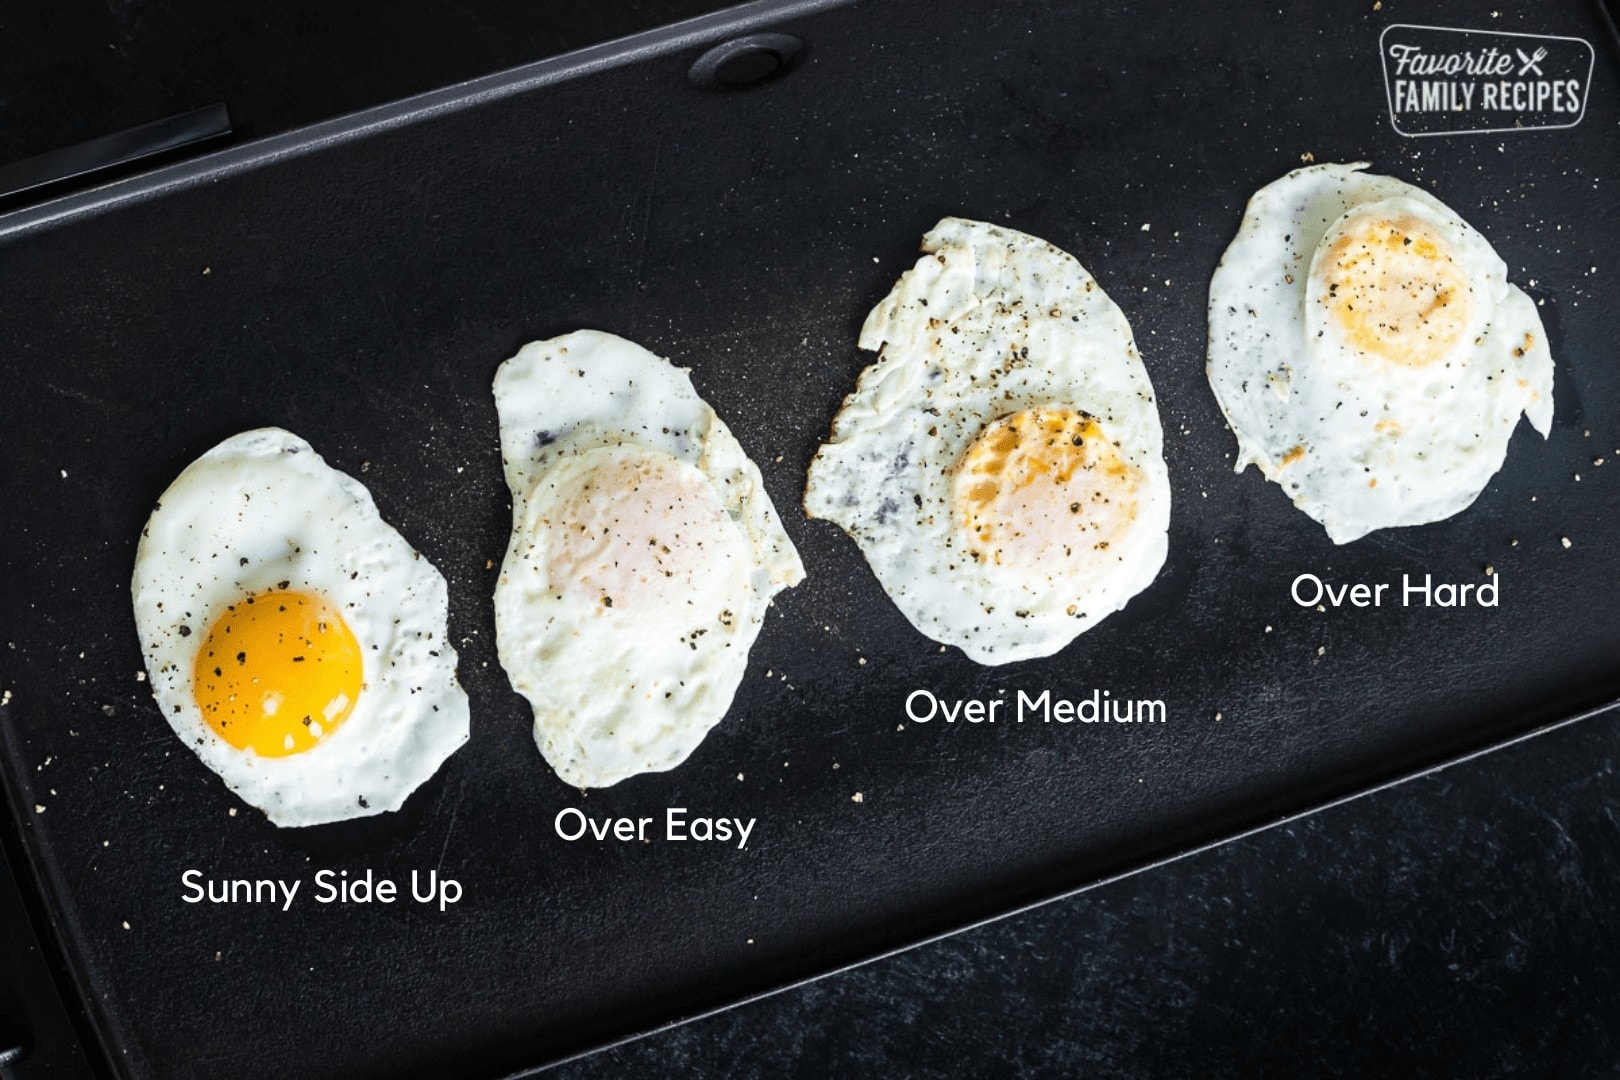 How To Fry An Egg 4 Ways